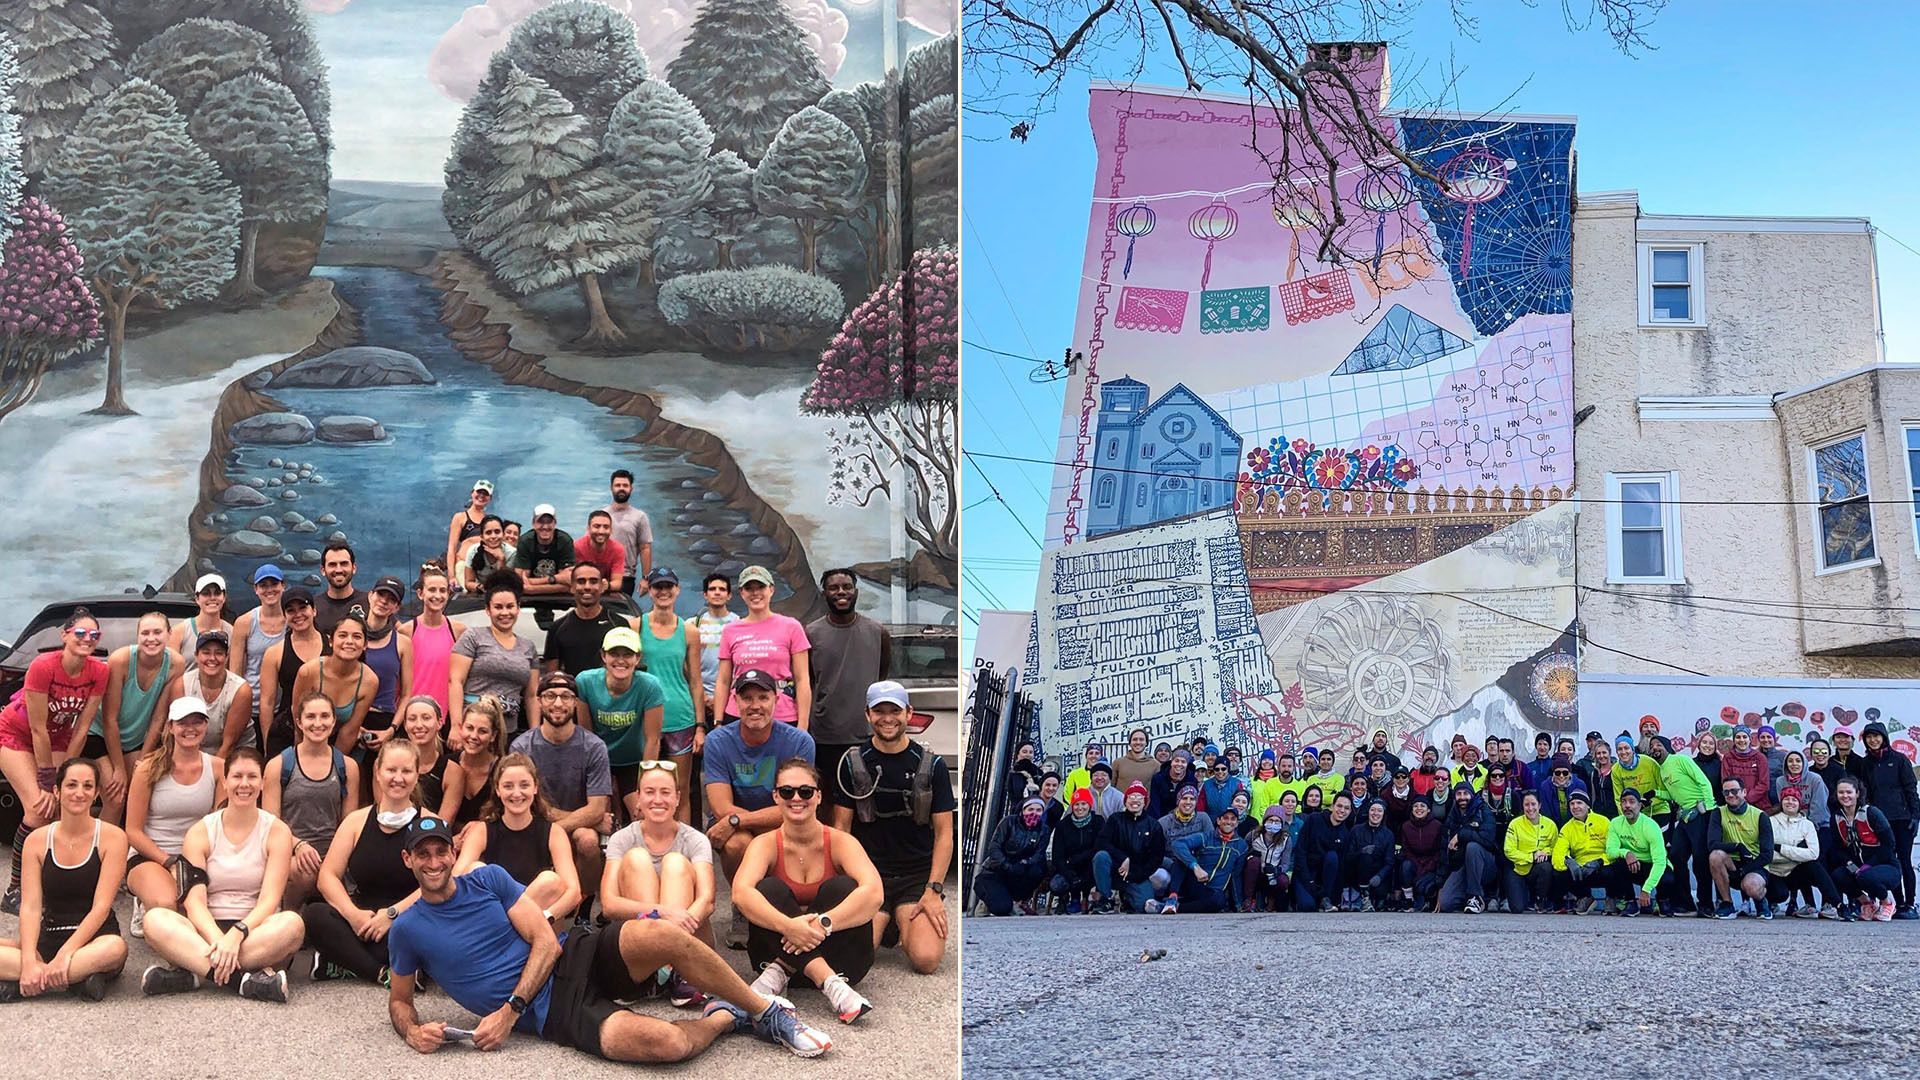 Two side-by-side photos of groups of runners posing in front of Philadelphia murals.